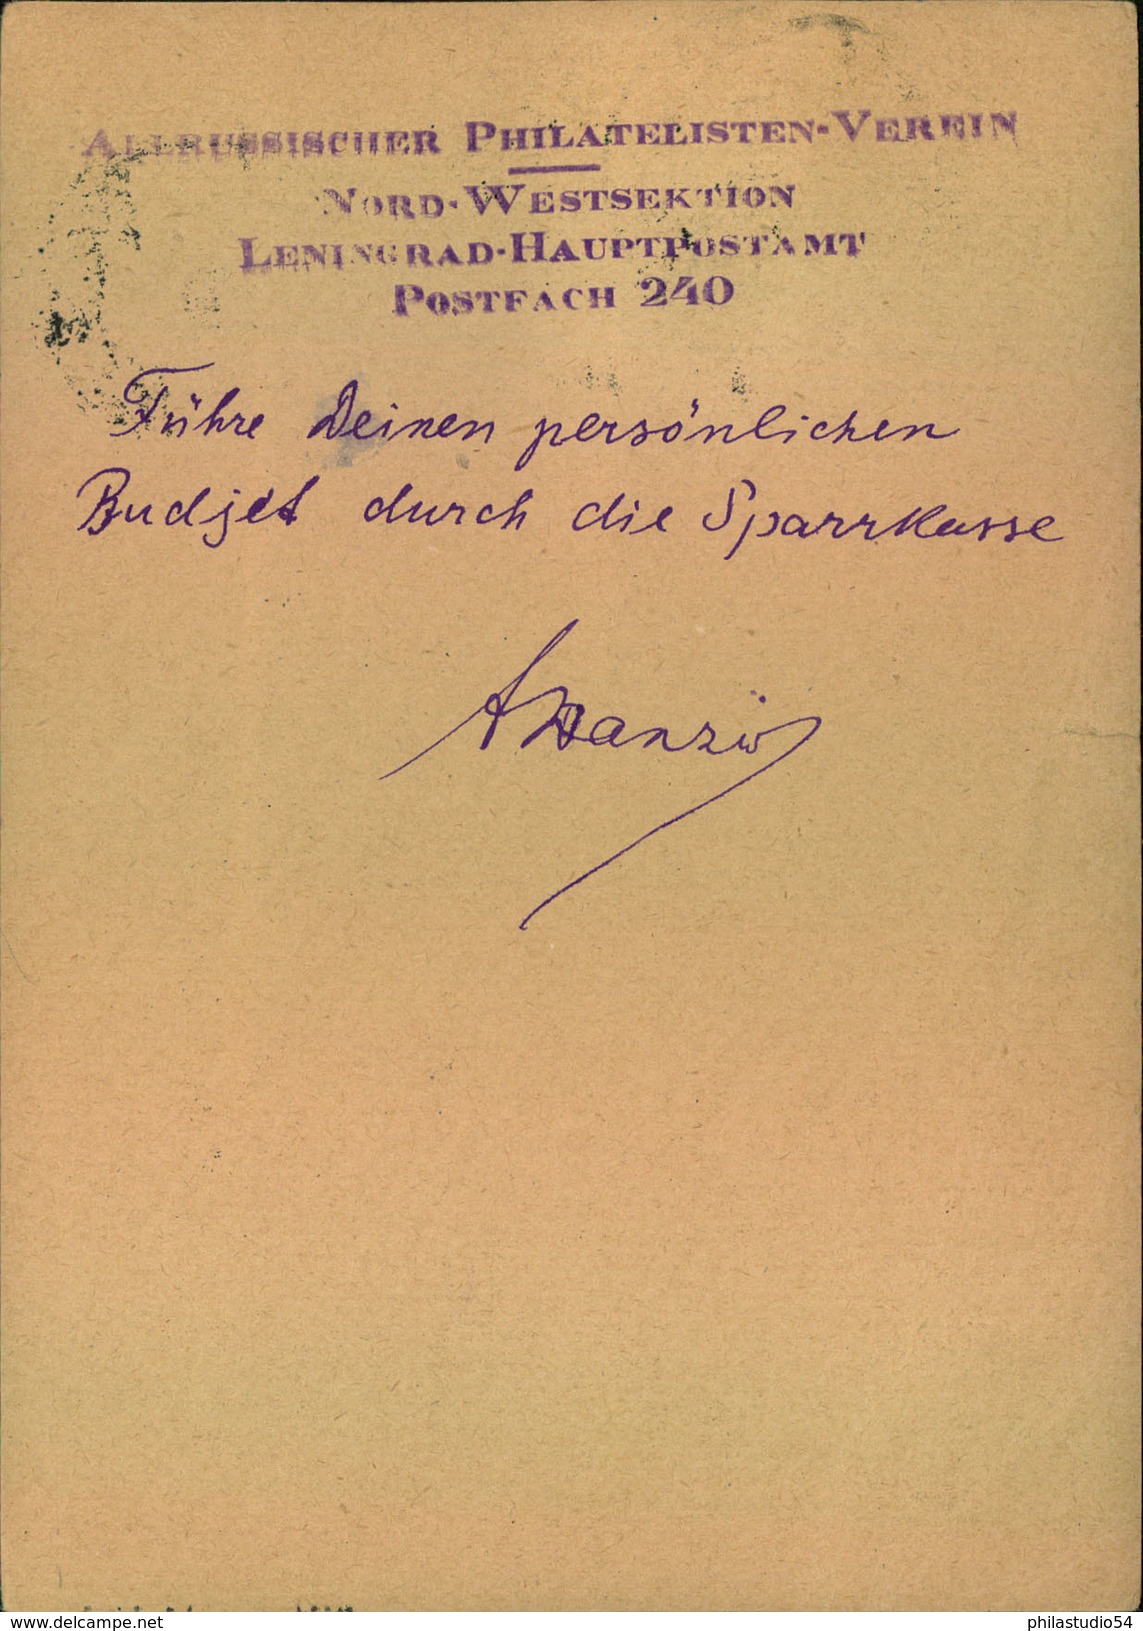 1929, Uprated Stat. Card Sent From LENINGRAD To Berlin. - Entiers Postaux